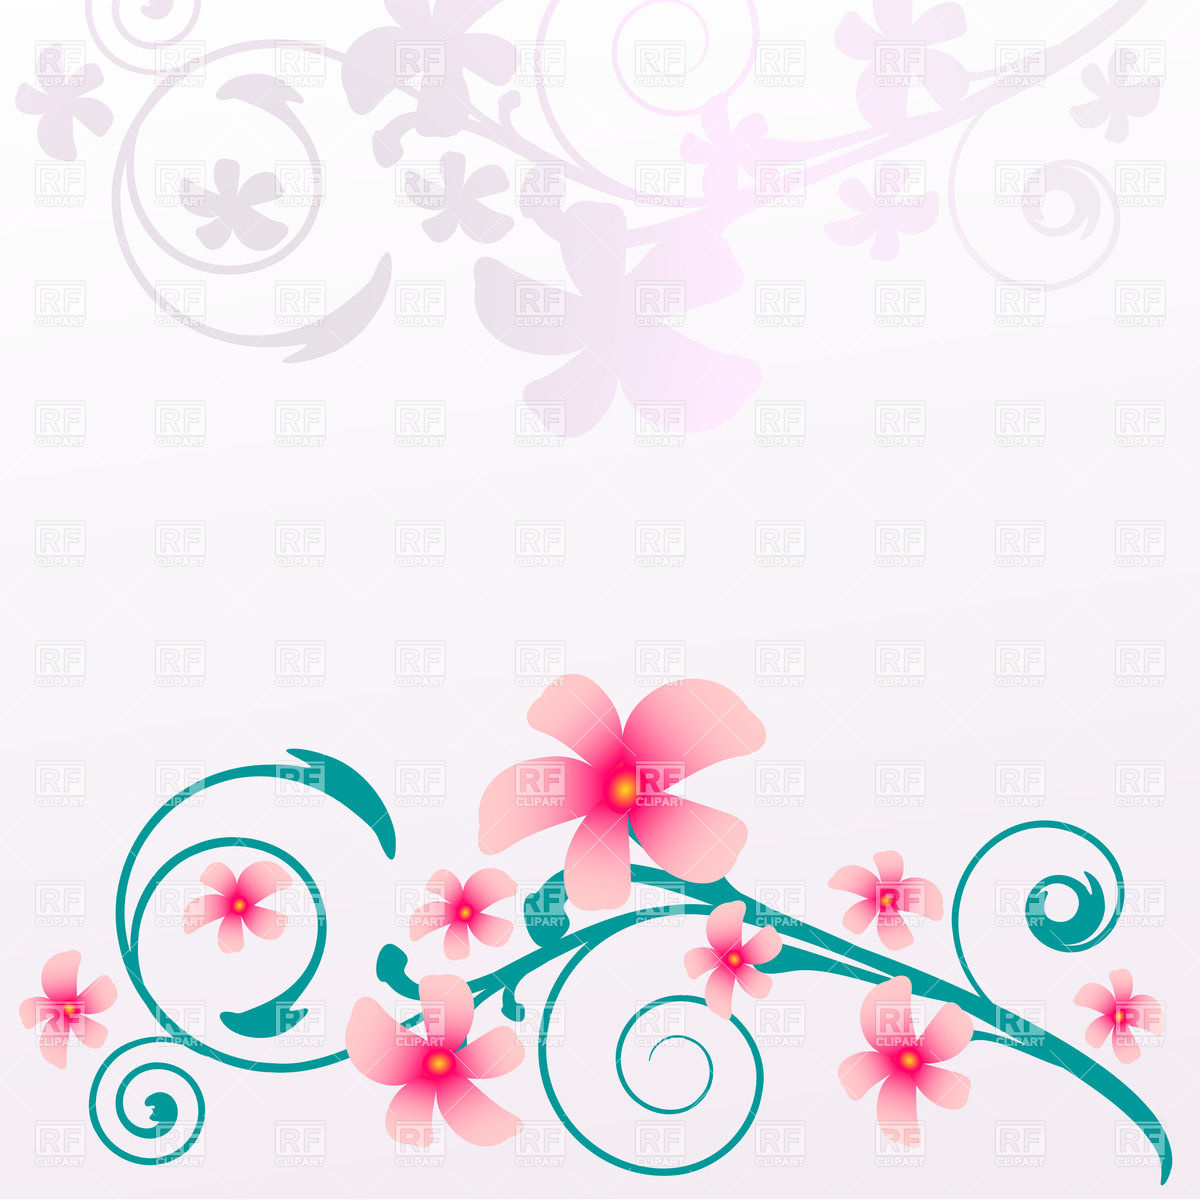 Curly Twig With Blooming Pink Flowers Download Royalty Free Vector